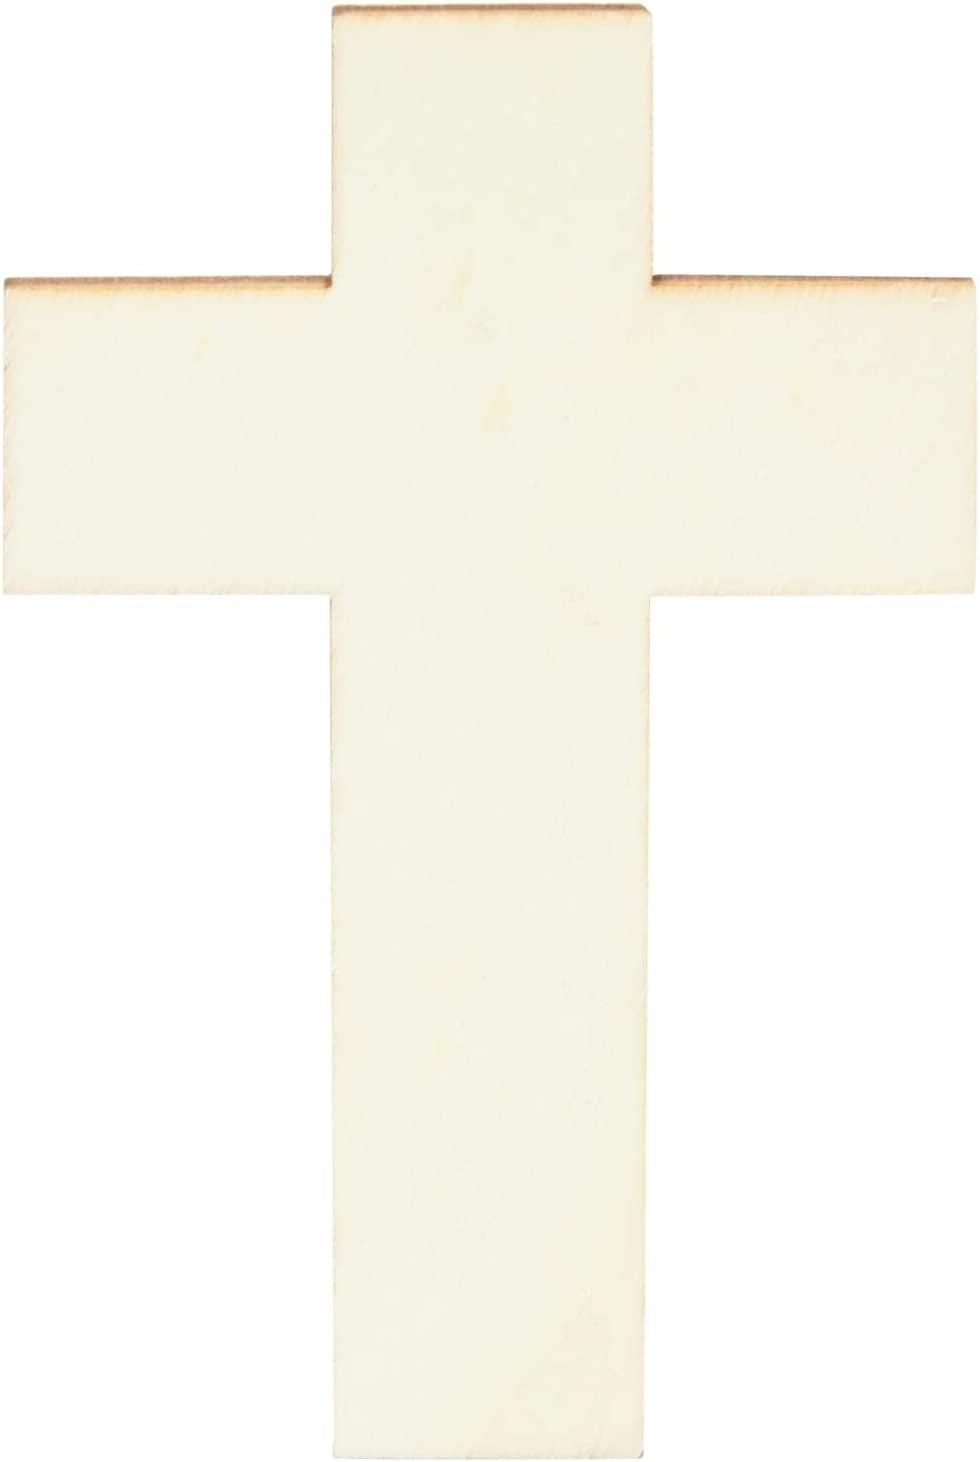 100 Pack Unfinished Wooden Crosses for Crafts, Bulk Cross Sunday School, DIY Projects (4.1 X 2.6 In) - WoodArtSupply